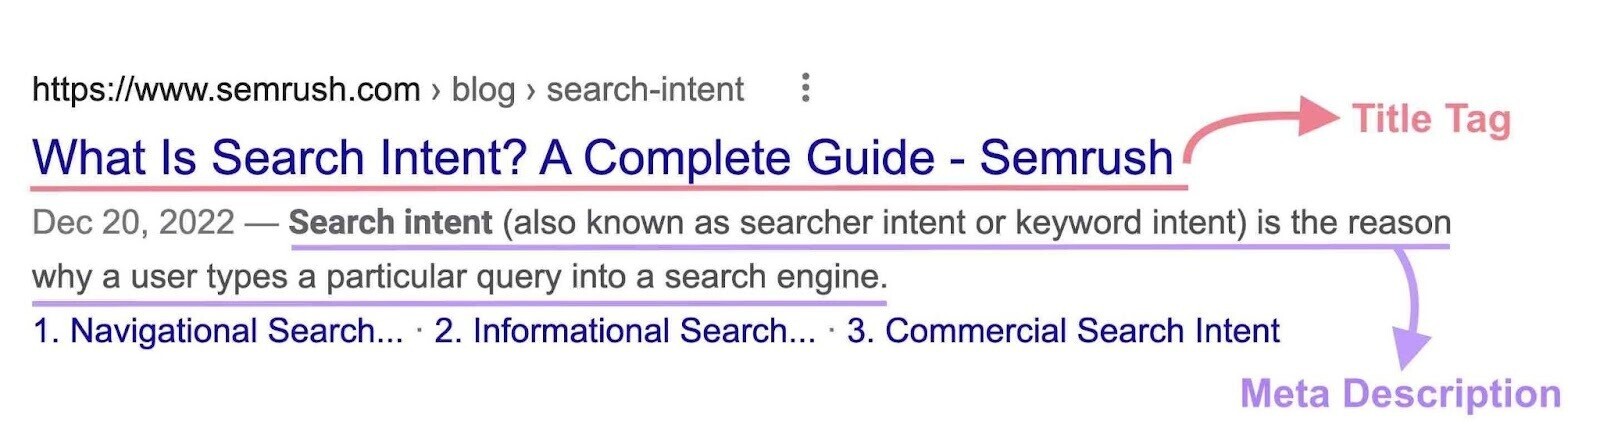 match search intent with title tag and meta description